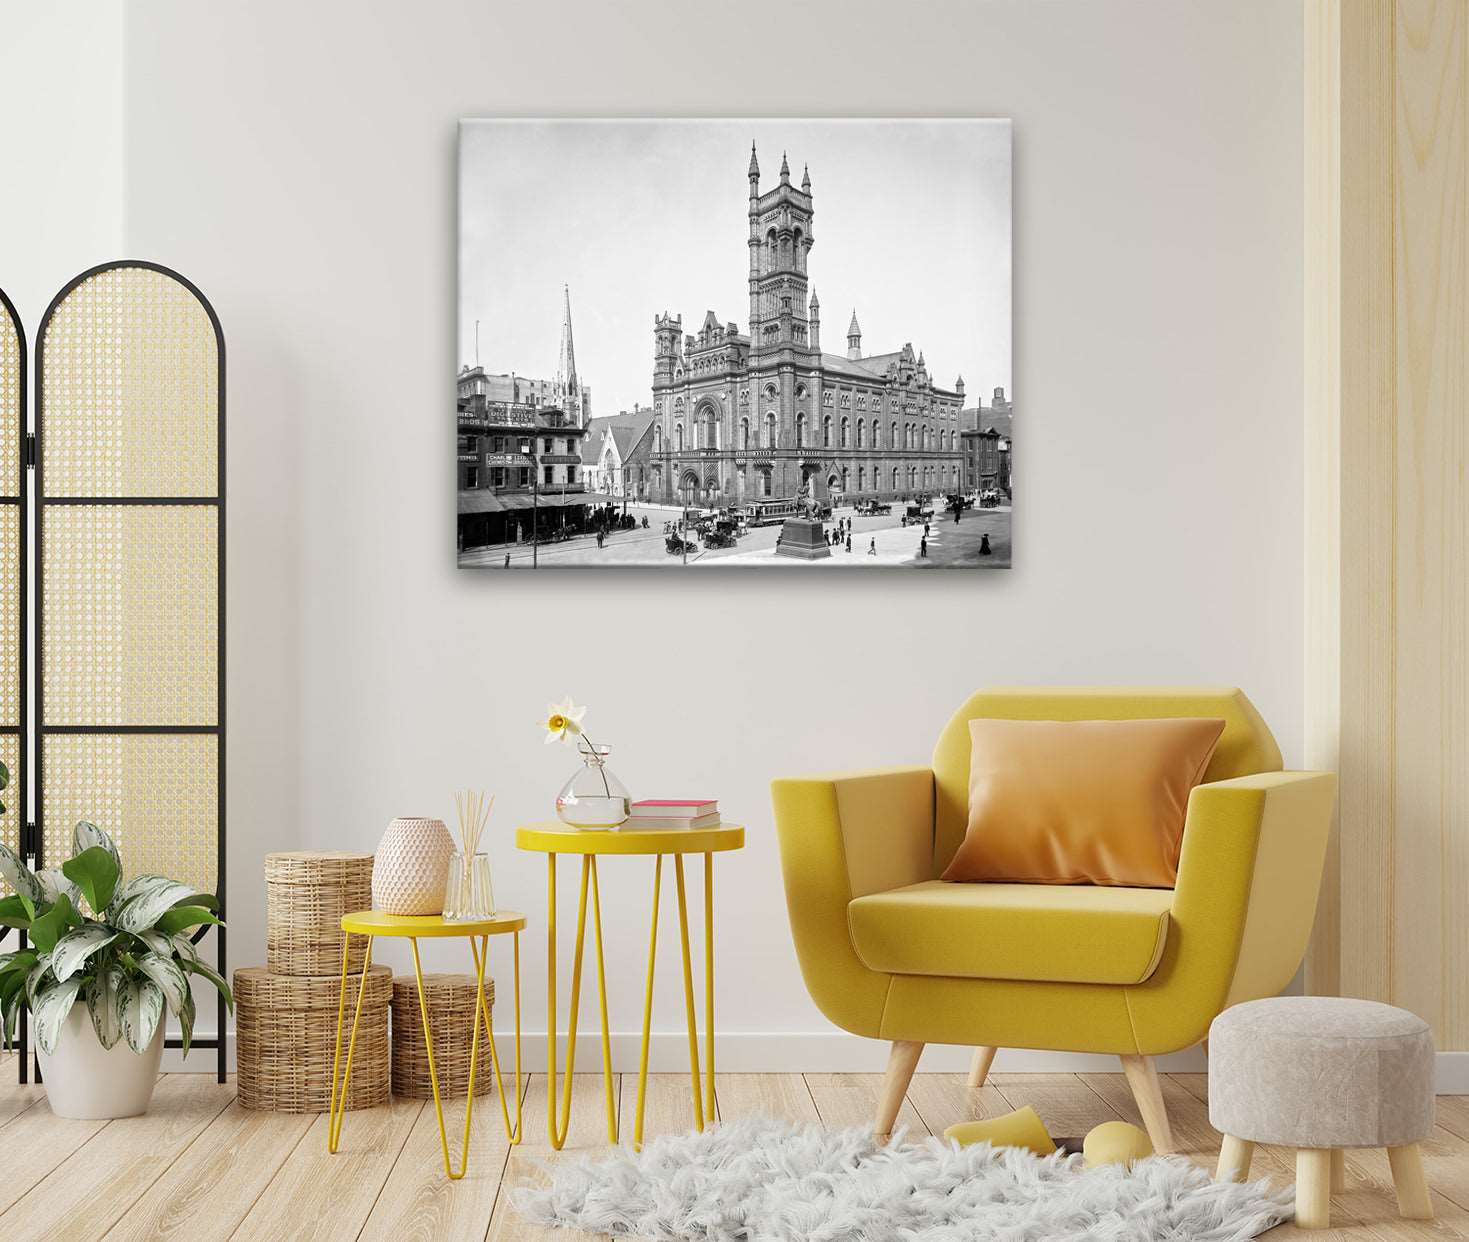 A bright room with yellow furniture and a canvas print on the wall, featuring a photo of Philadelphia's Masonic Temple